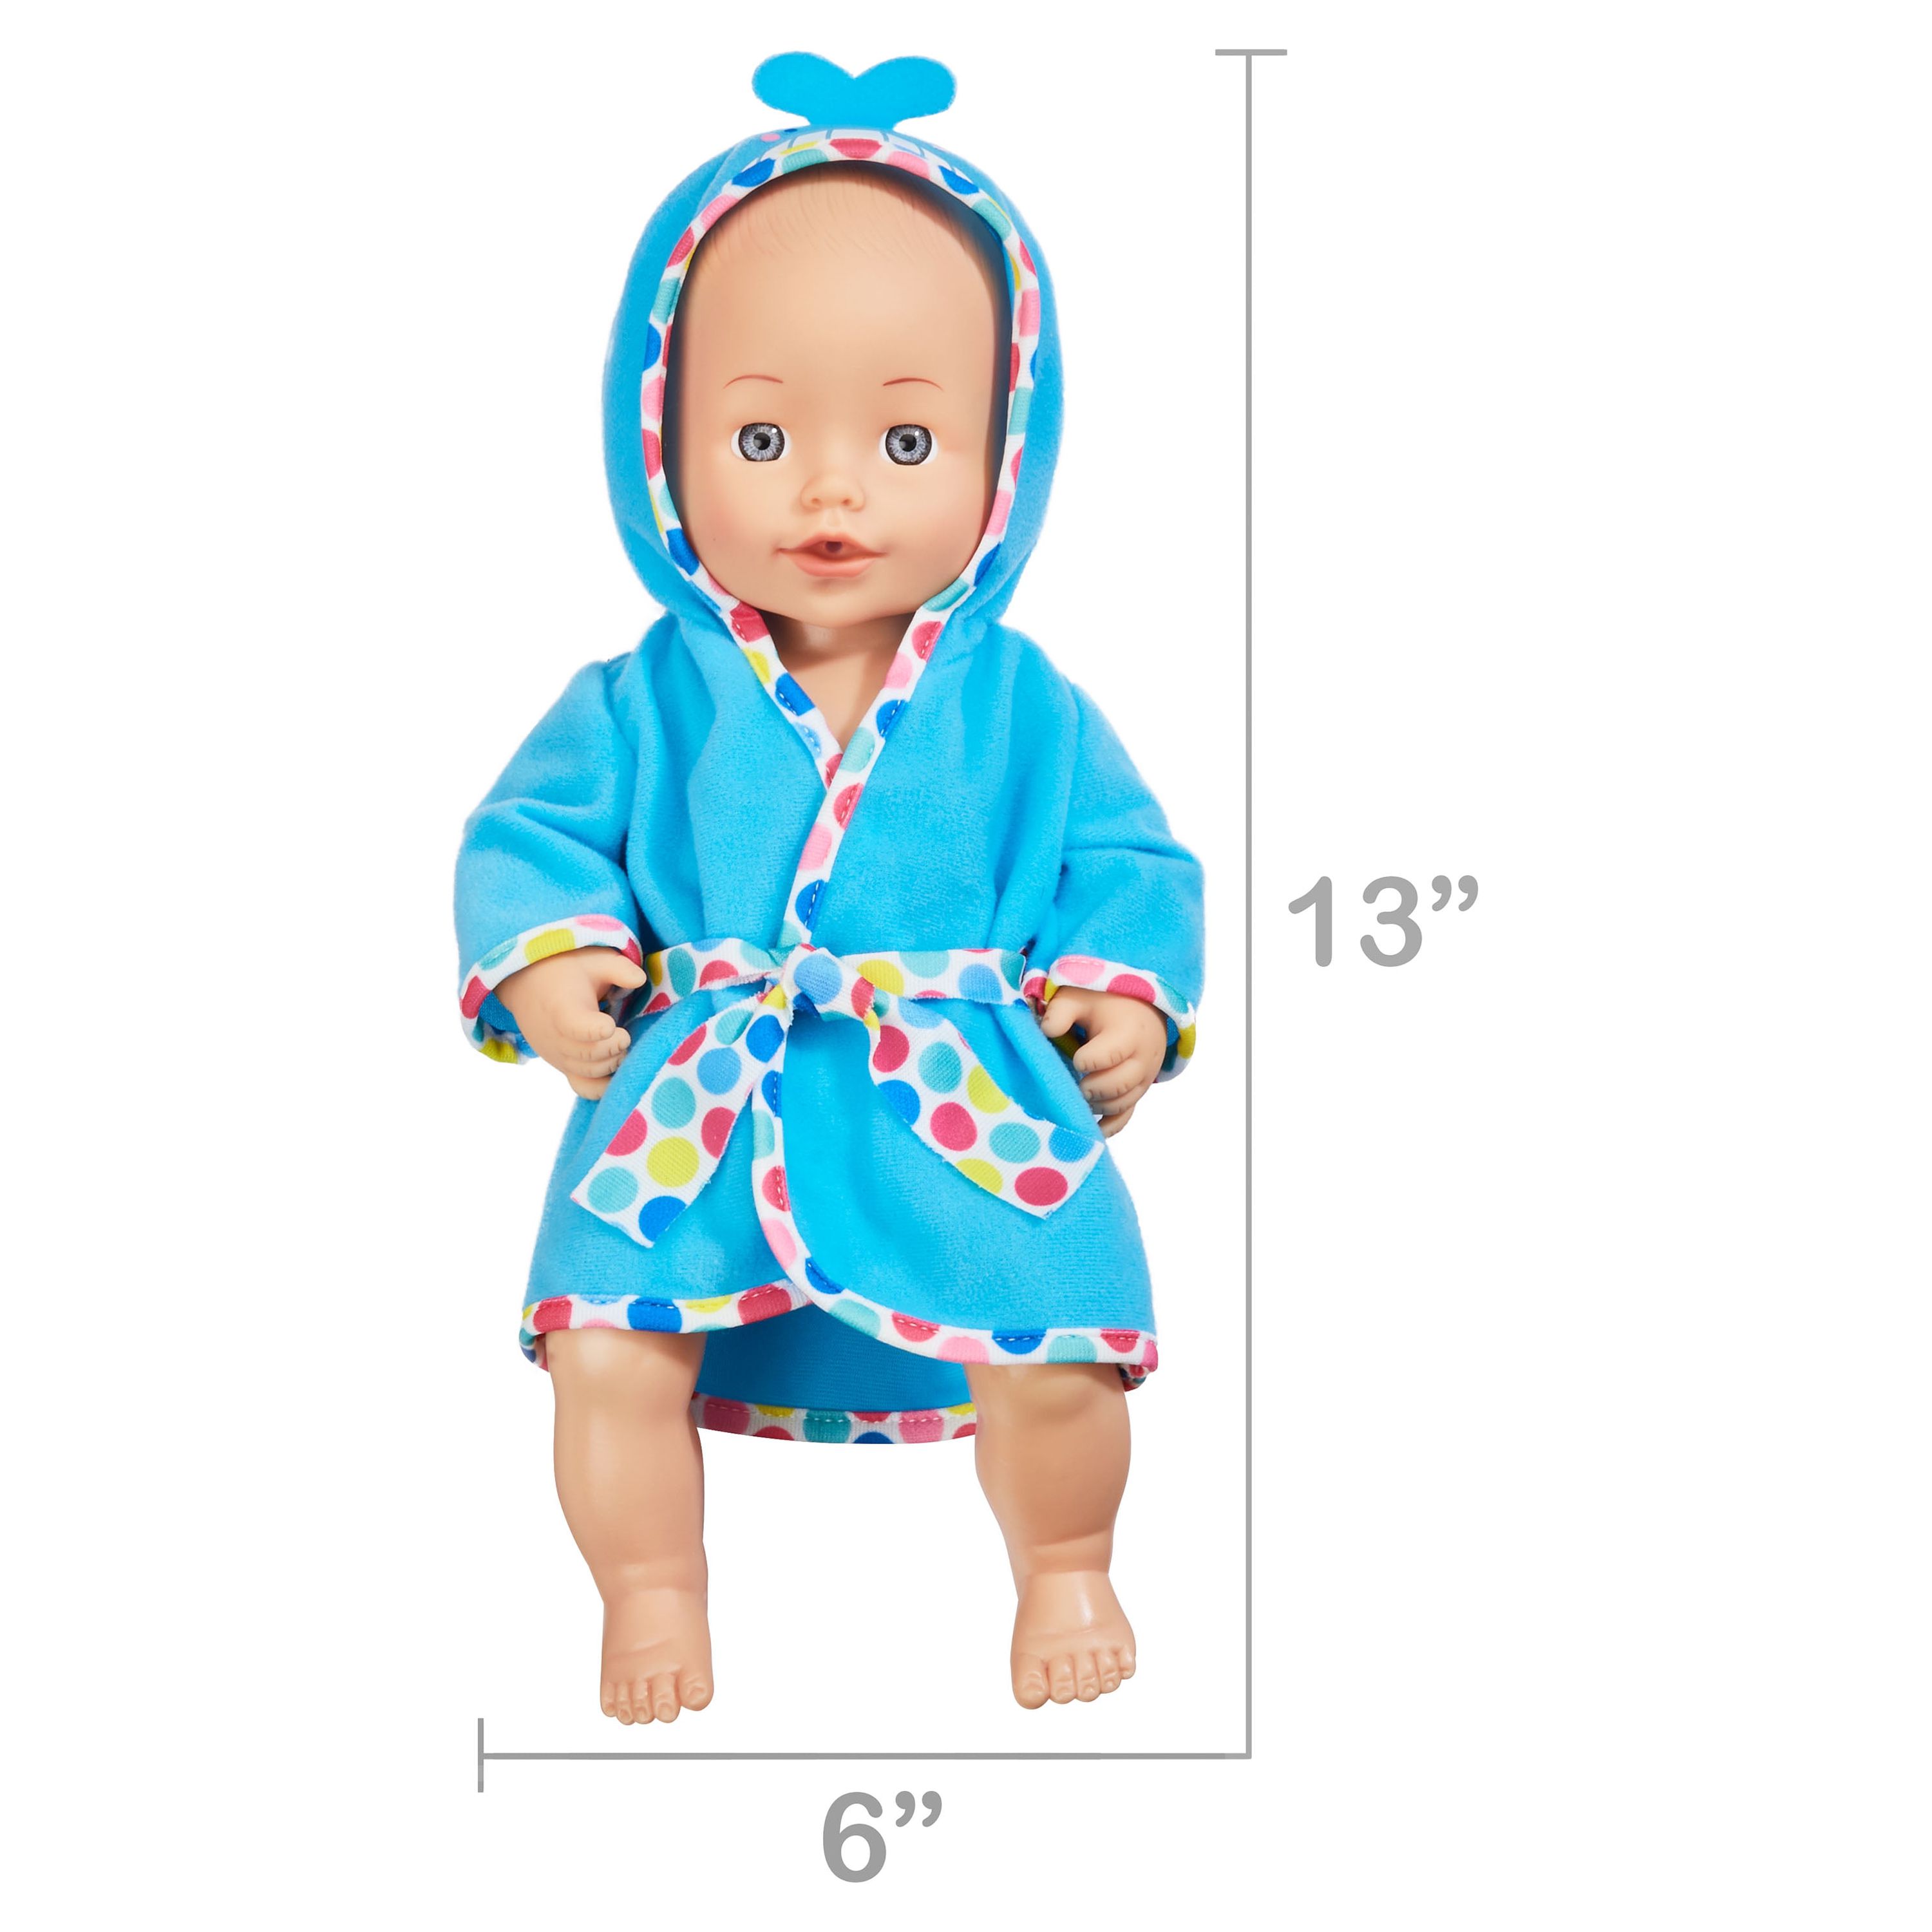 Kid Connection Bathing Baby Doll Play Set, Light Skin Tone - image 5 of 5